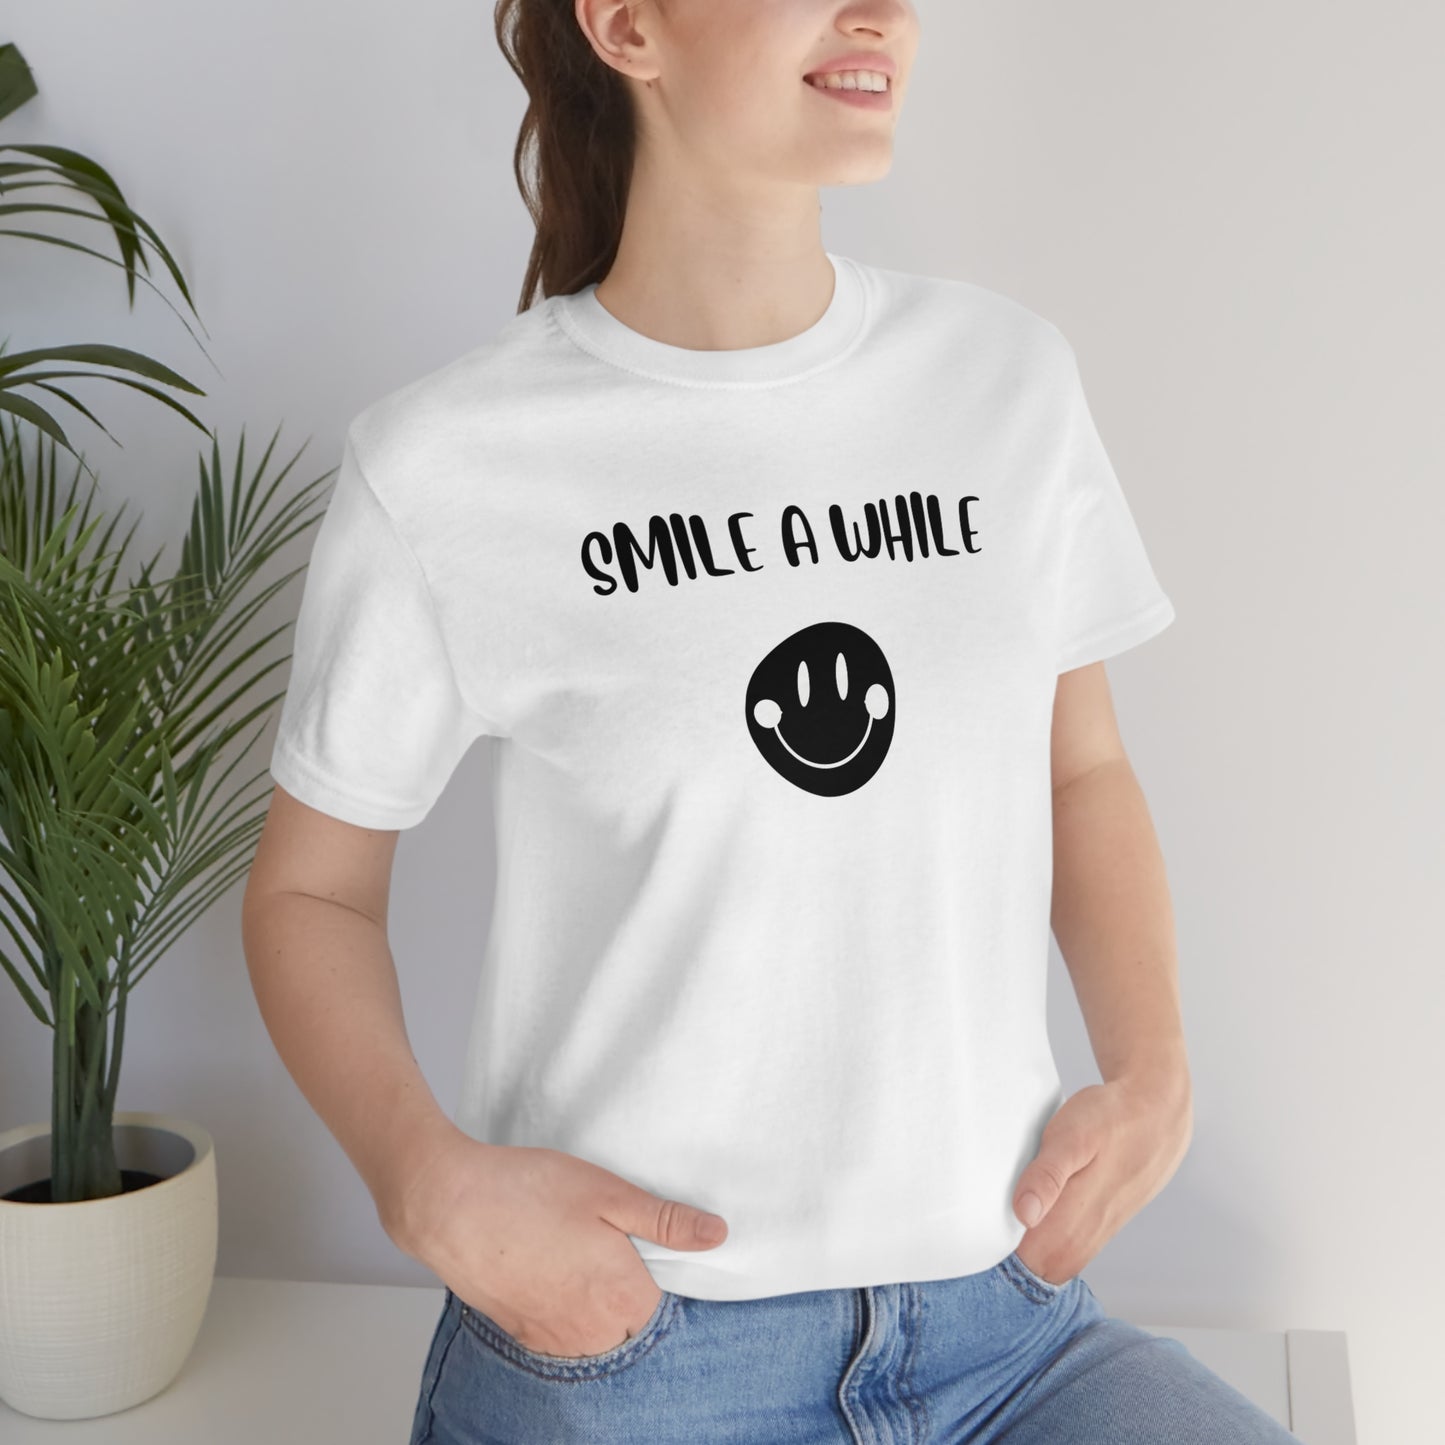 Smile a while inspirational words t shirts gift, t shirts gift that motivates, t shirt gifts for friends